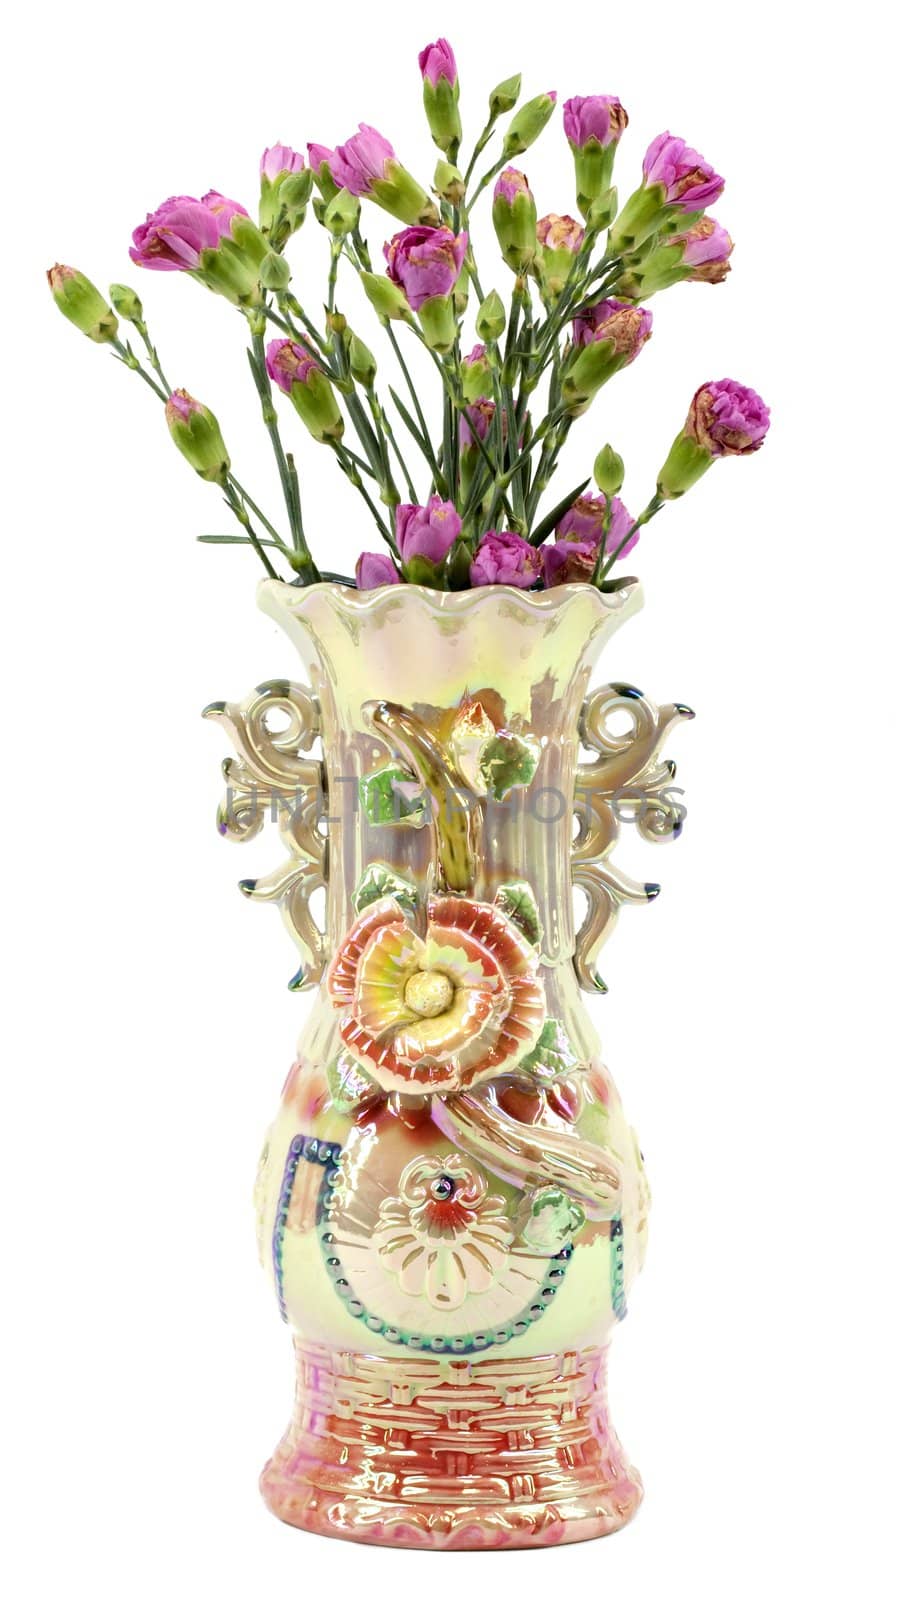 Ornate vase with pink carnations on white background